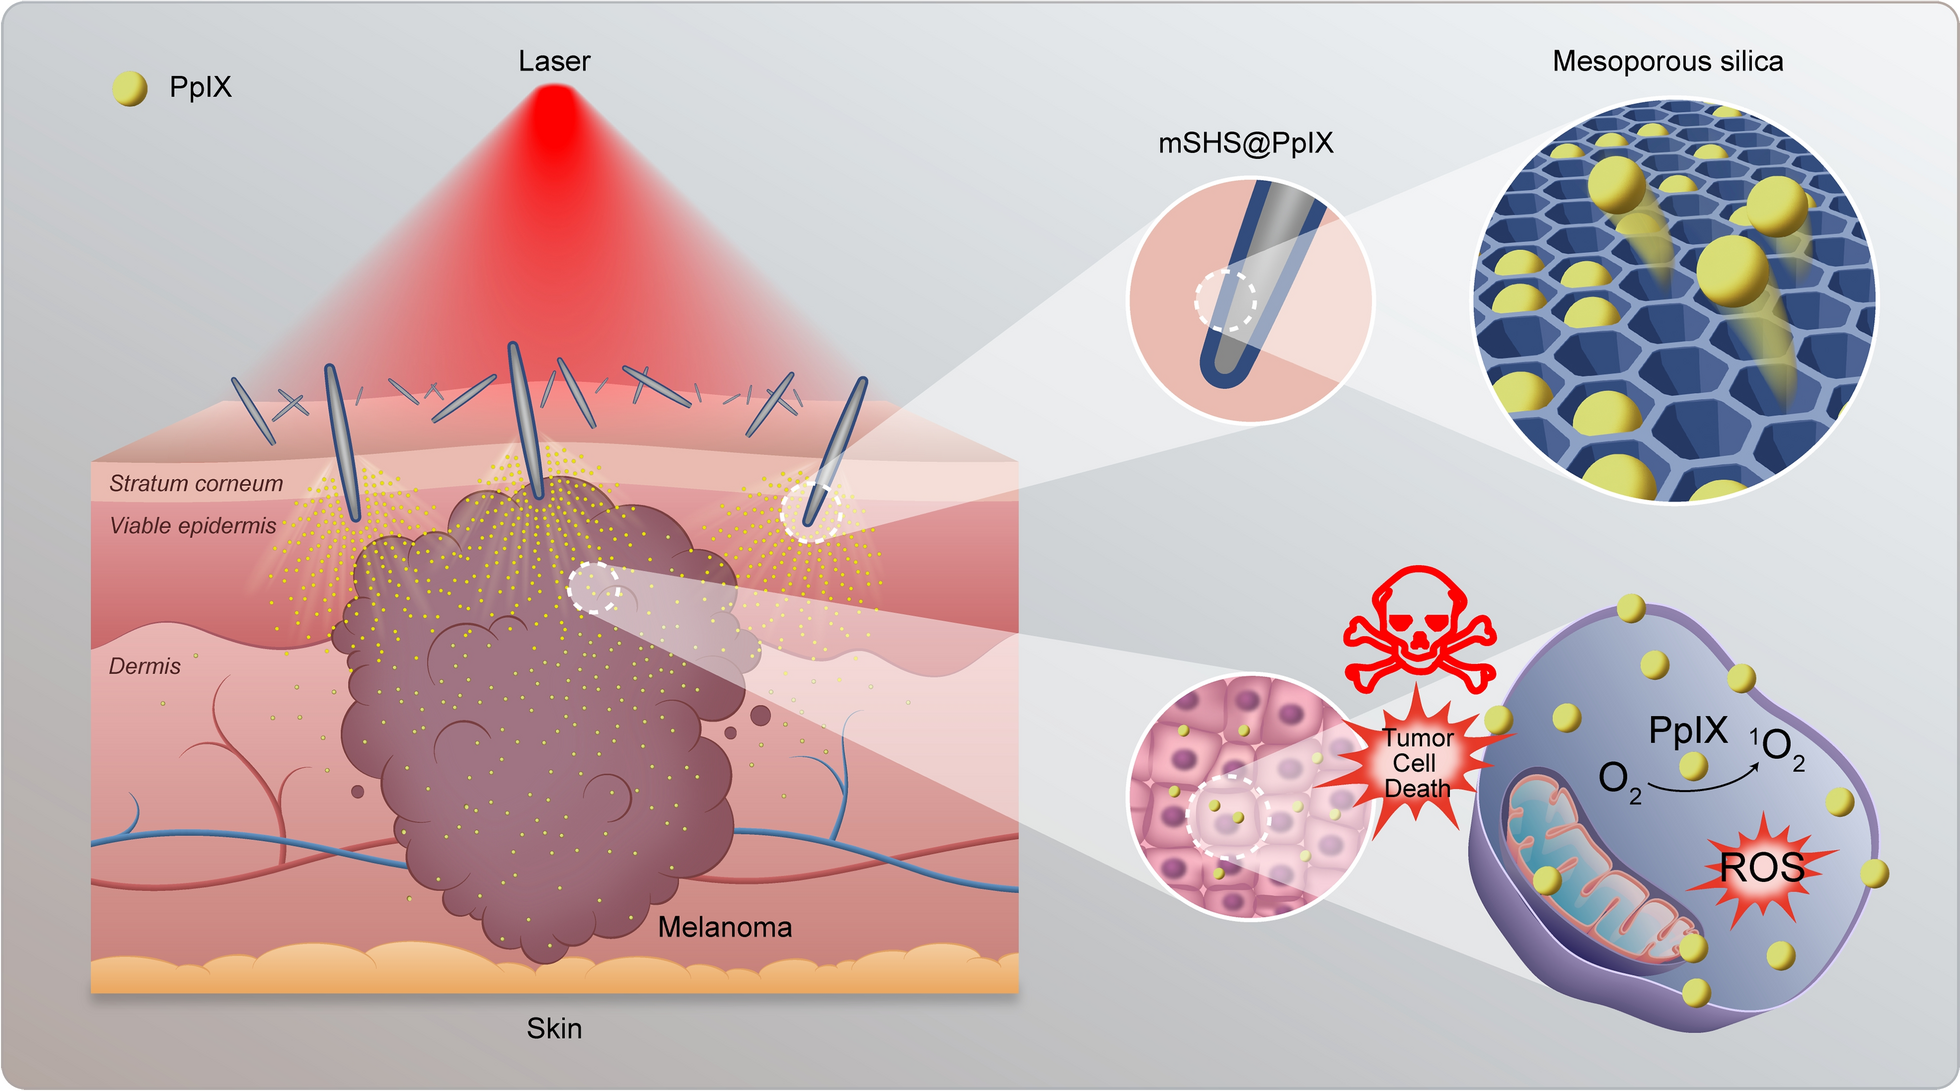 Mesoporous silica coated spicules for photodynamic therapy of metastatic melanoma